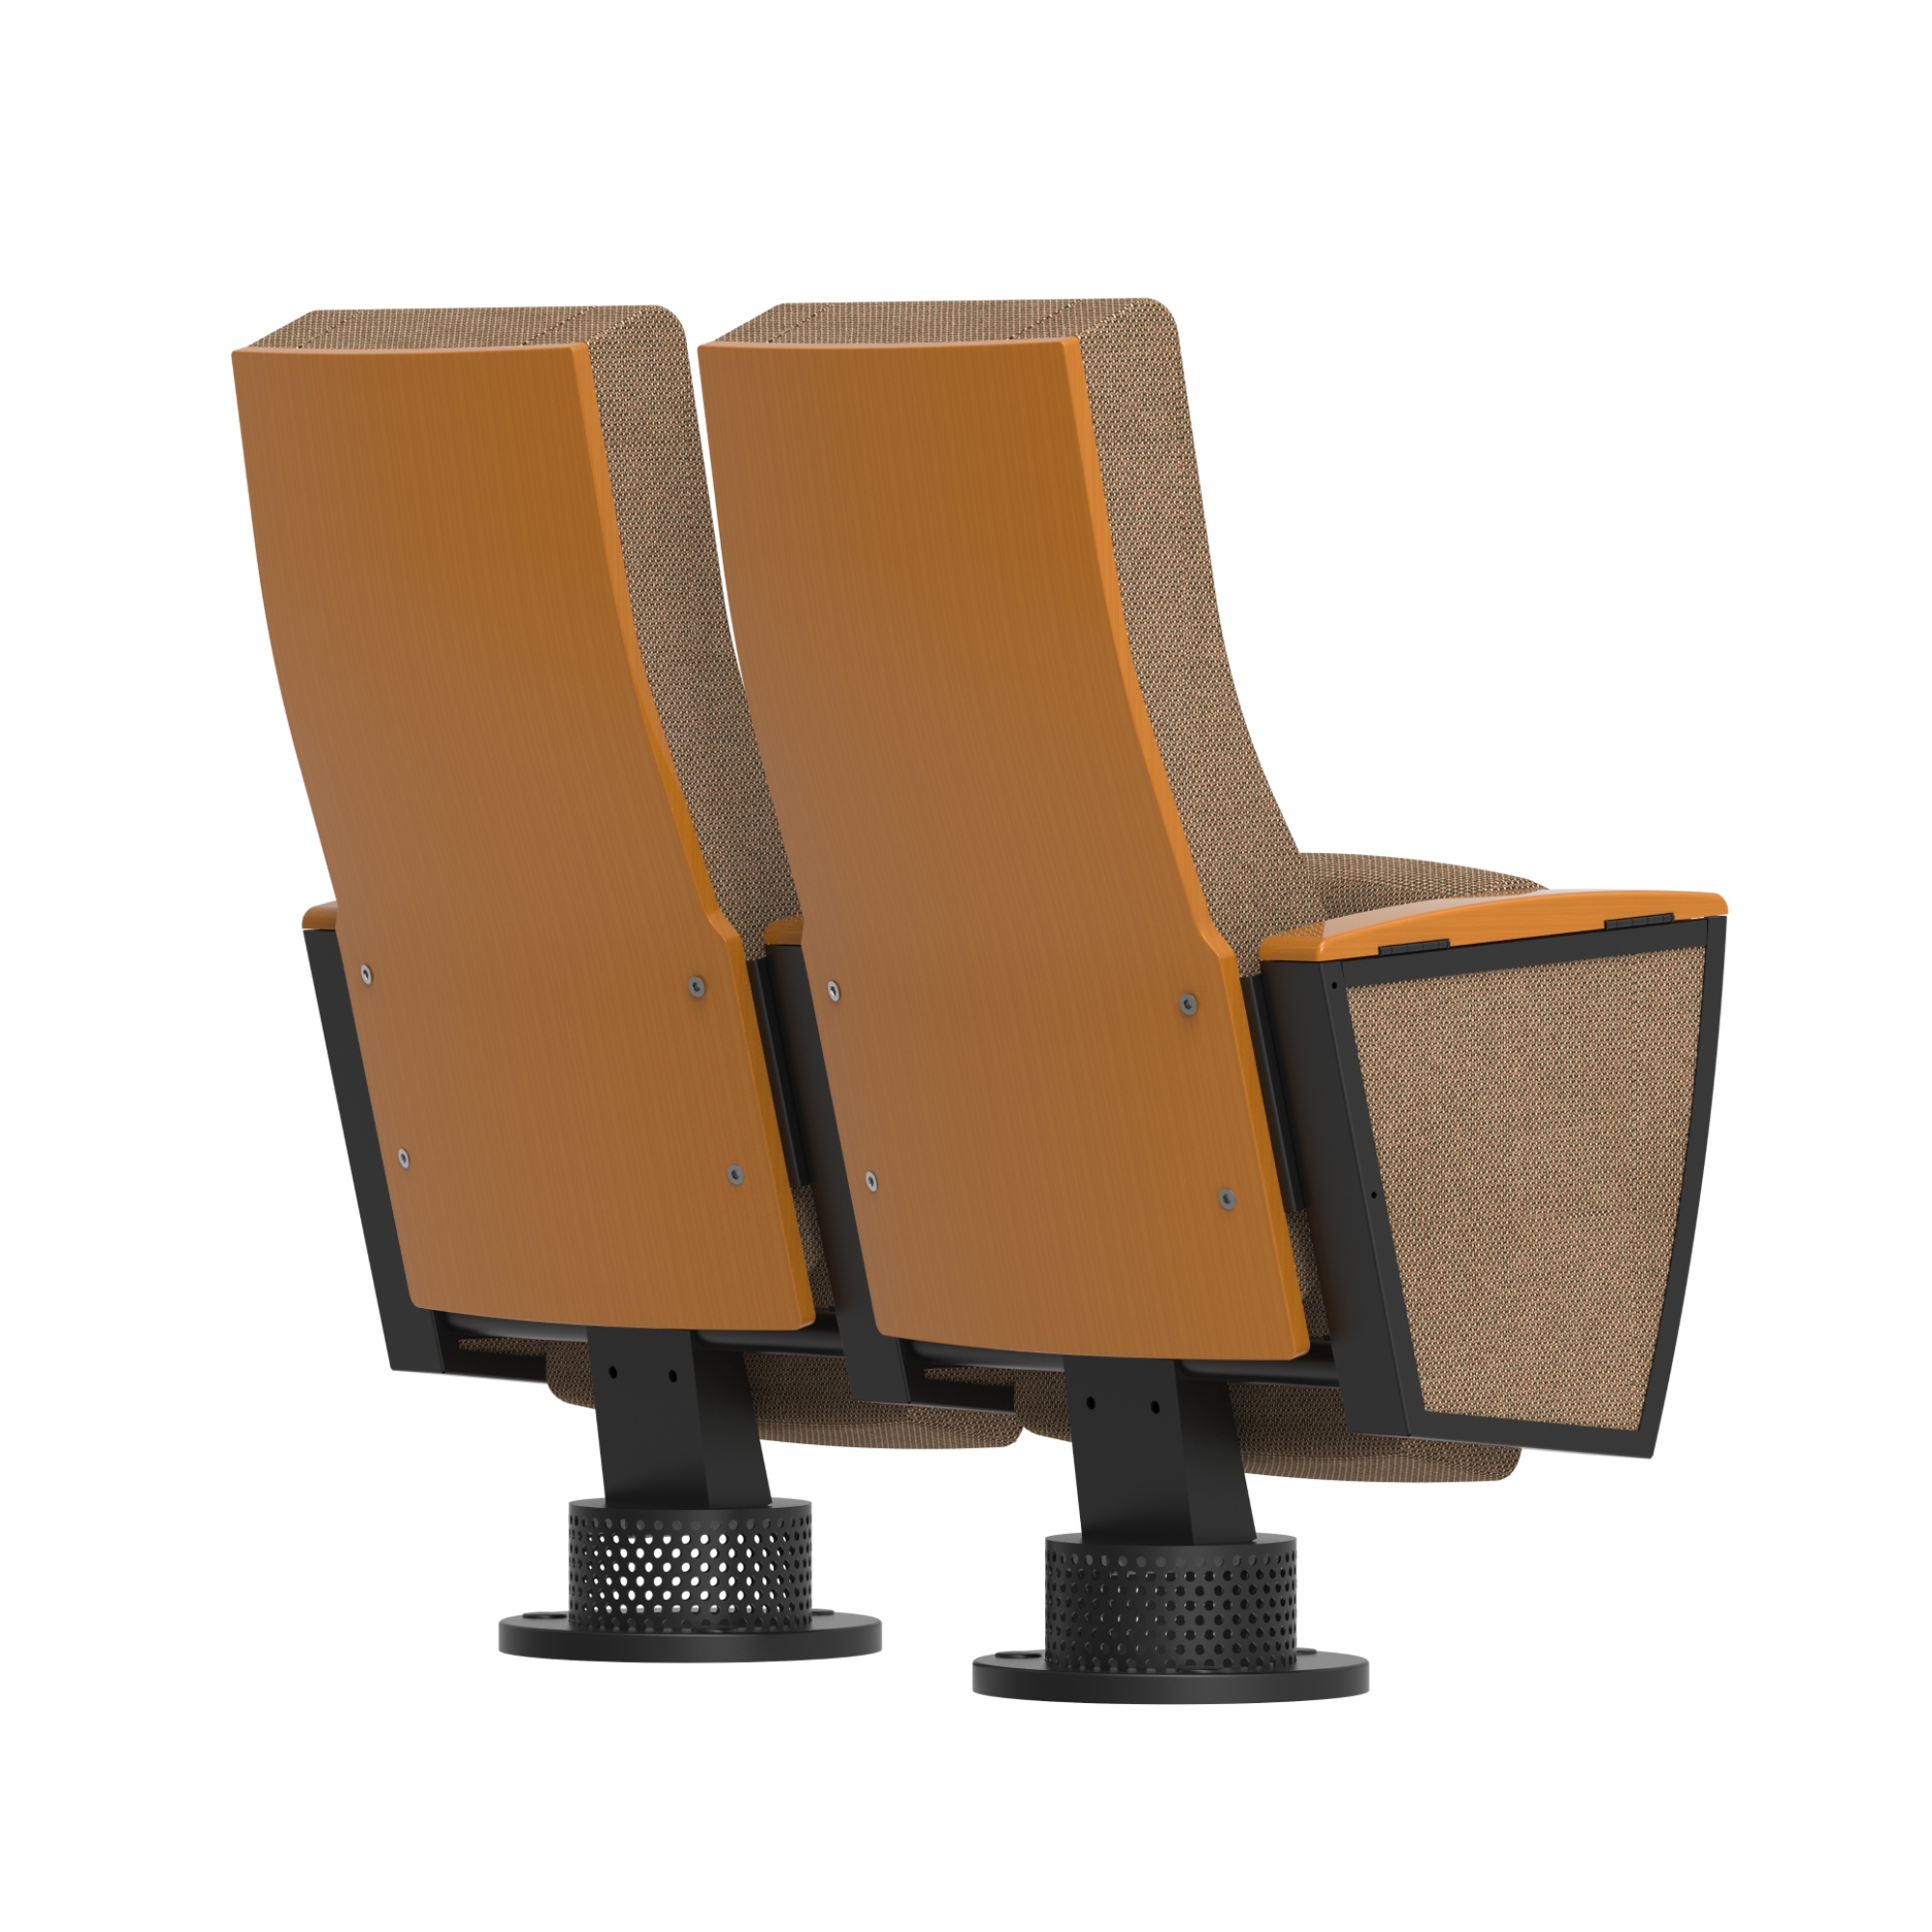 Cinema chairs for sale with wooden school hotel conference auditorium seats lecture seating